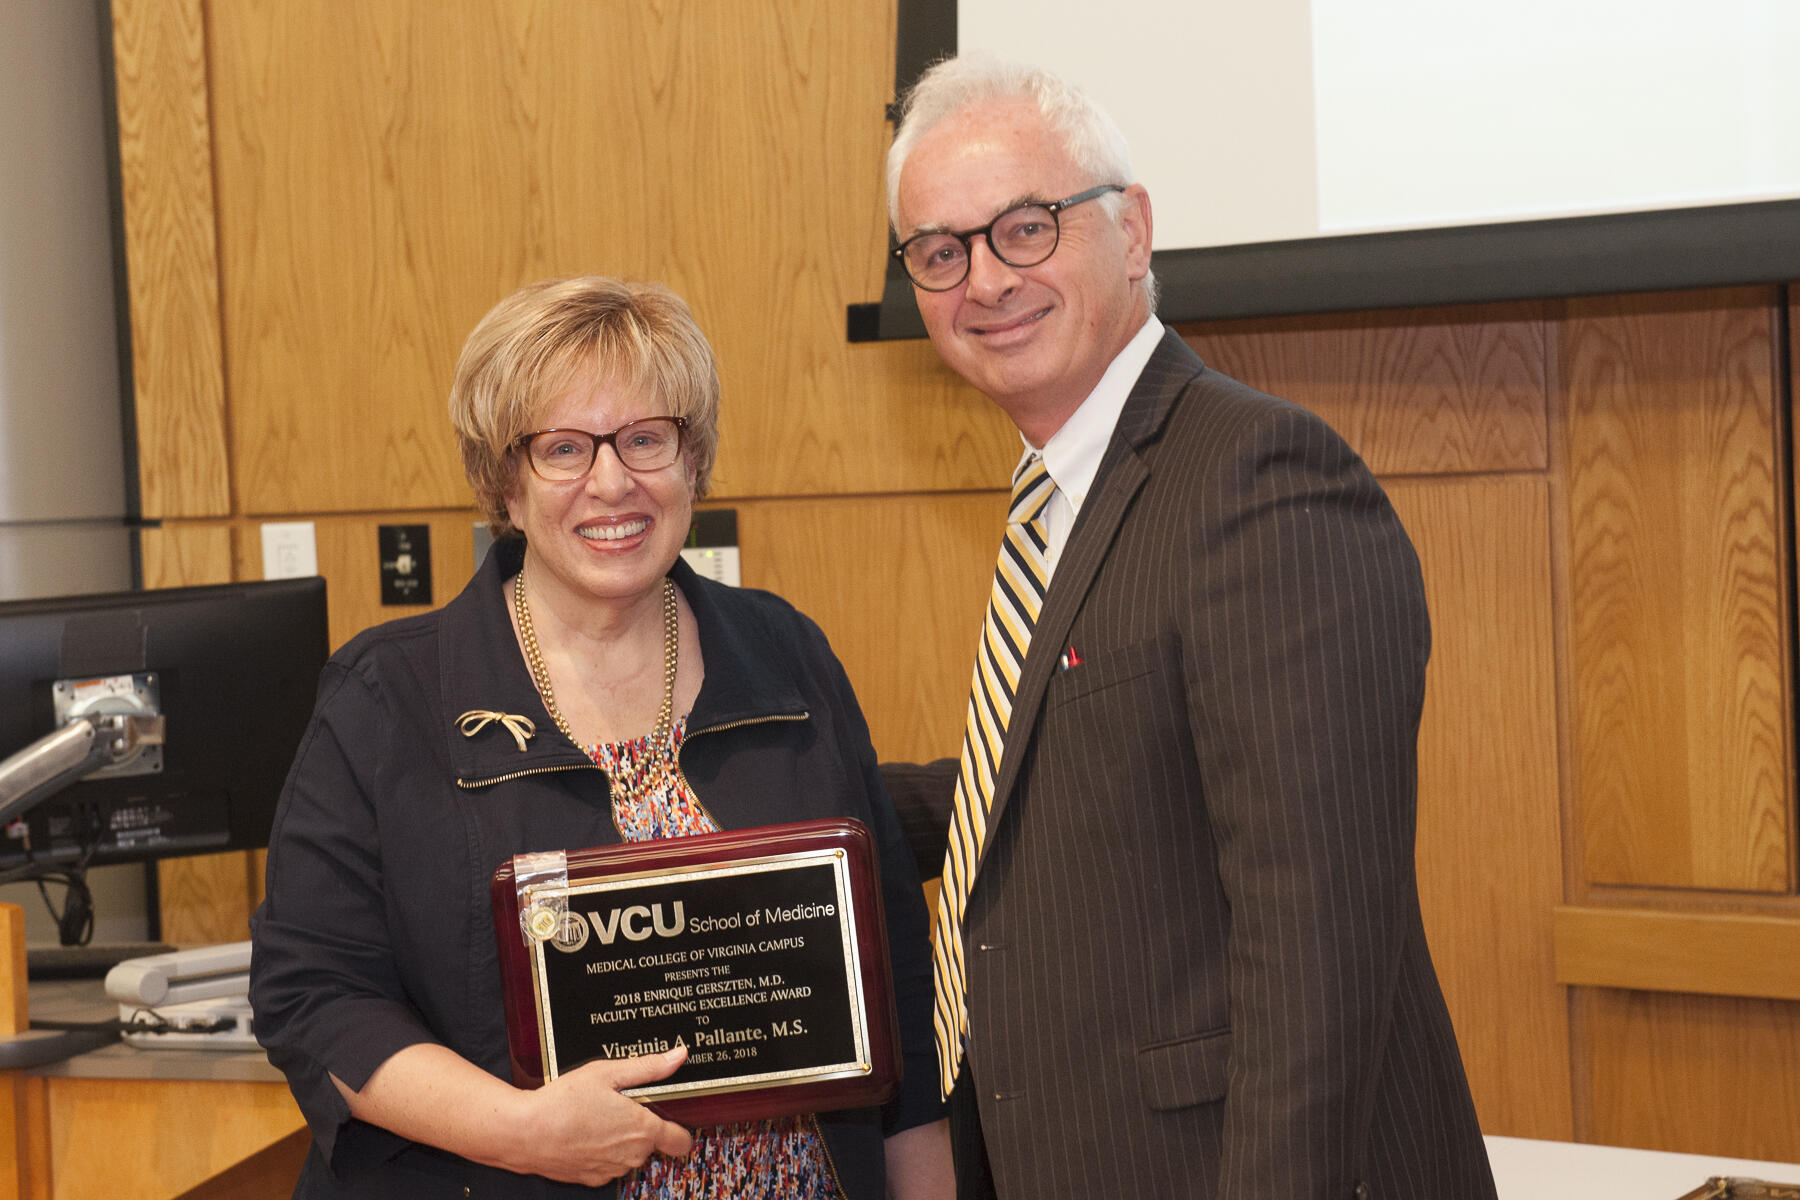 Virginia Pallante, left, an instructor and senior genetic counselor in the Department of Human and Molecular Genetics at VCU Health, also was recognized with the Gerszten Award. (Photo by Tom Kojcsich, University Relations)